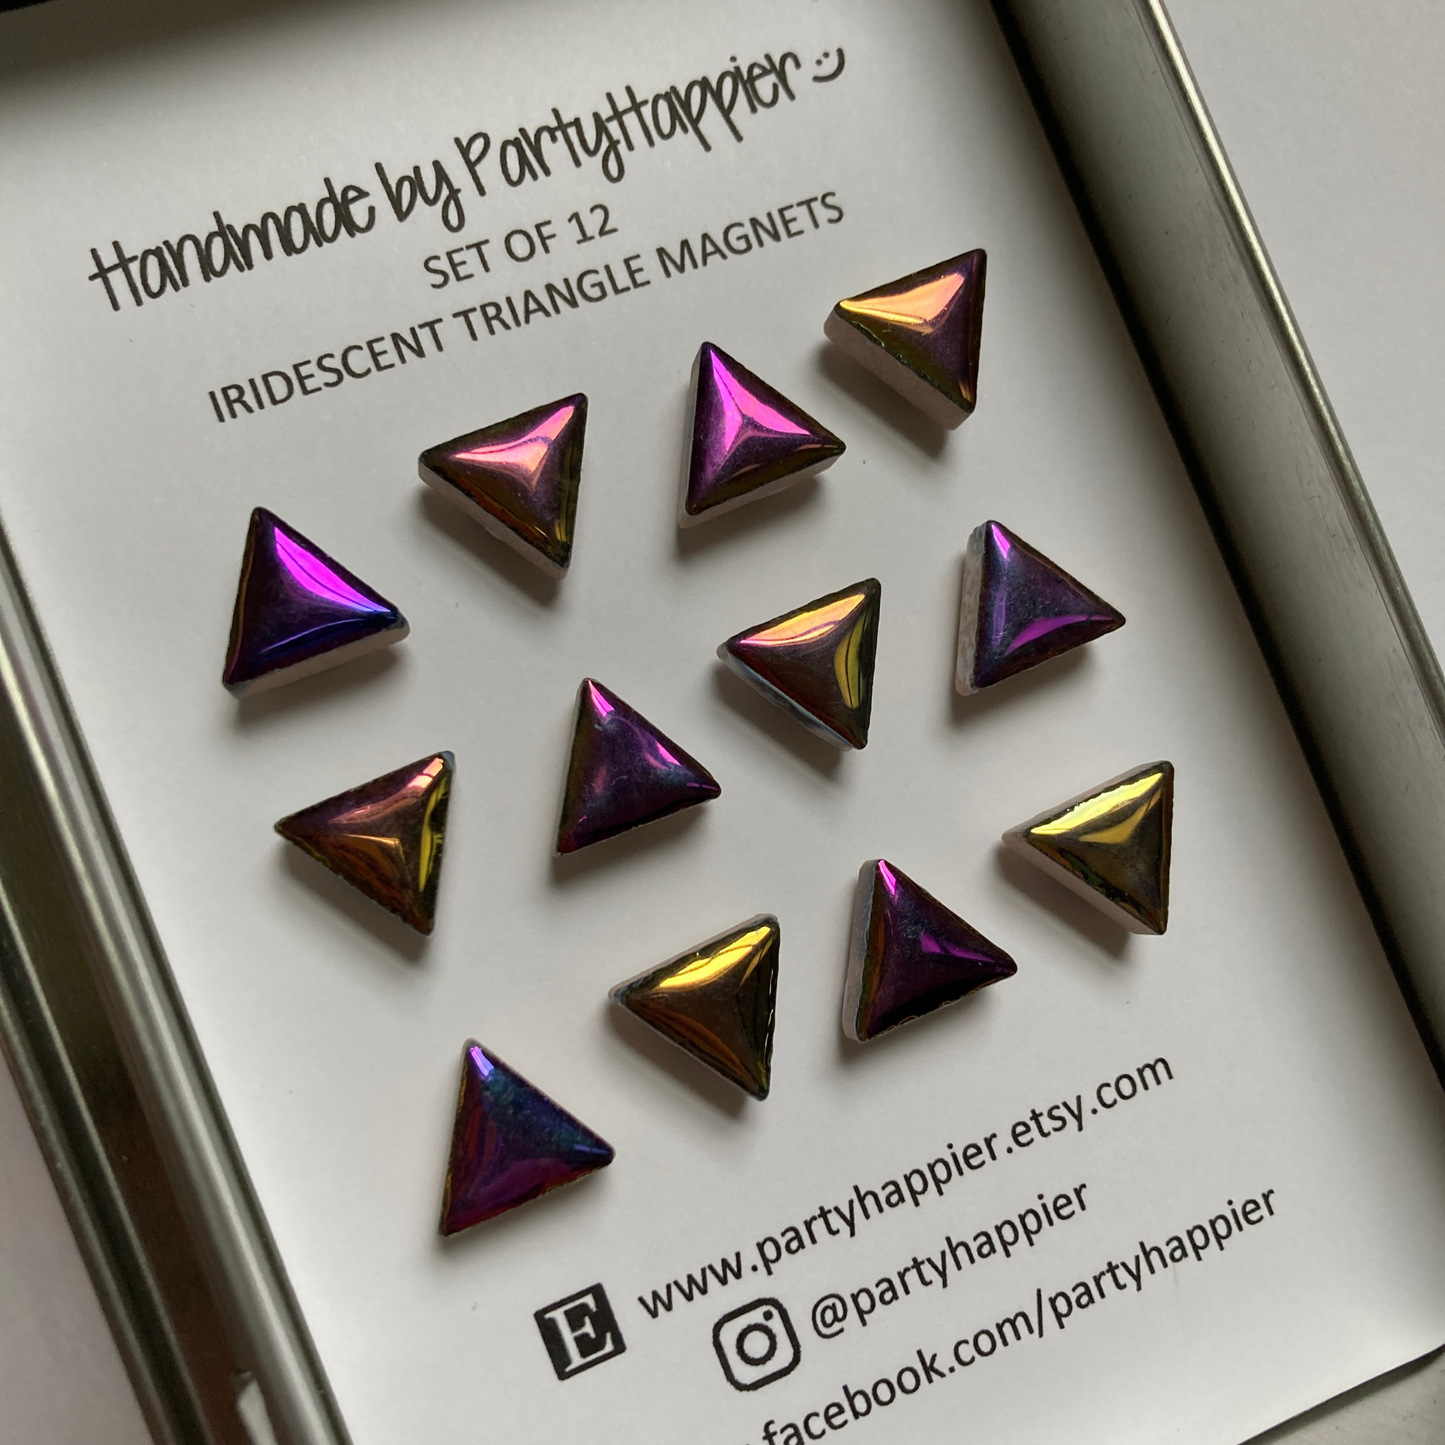 Iridescent Triangle Magnets